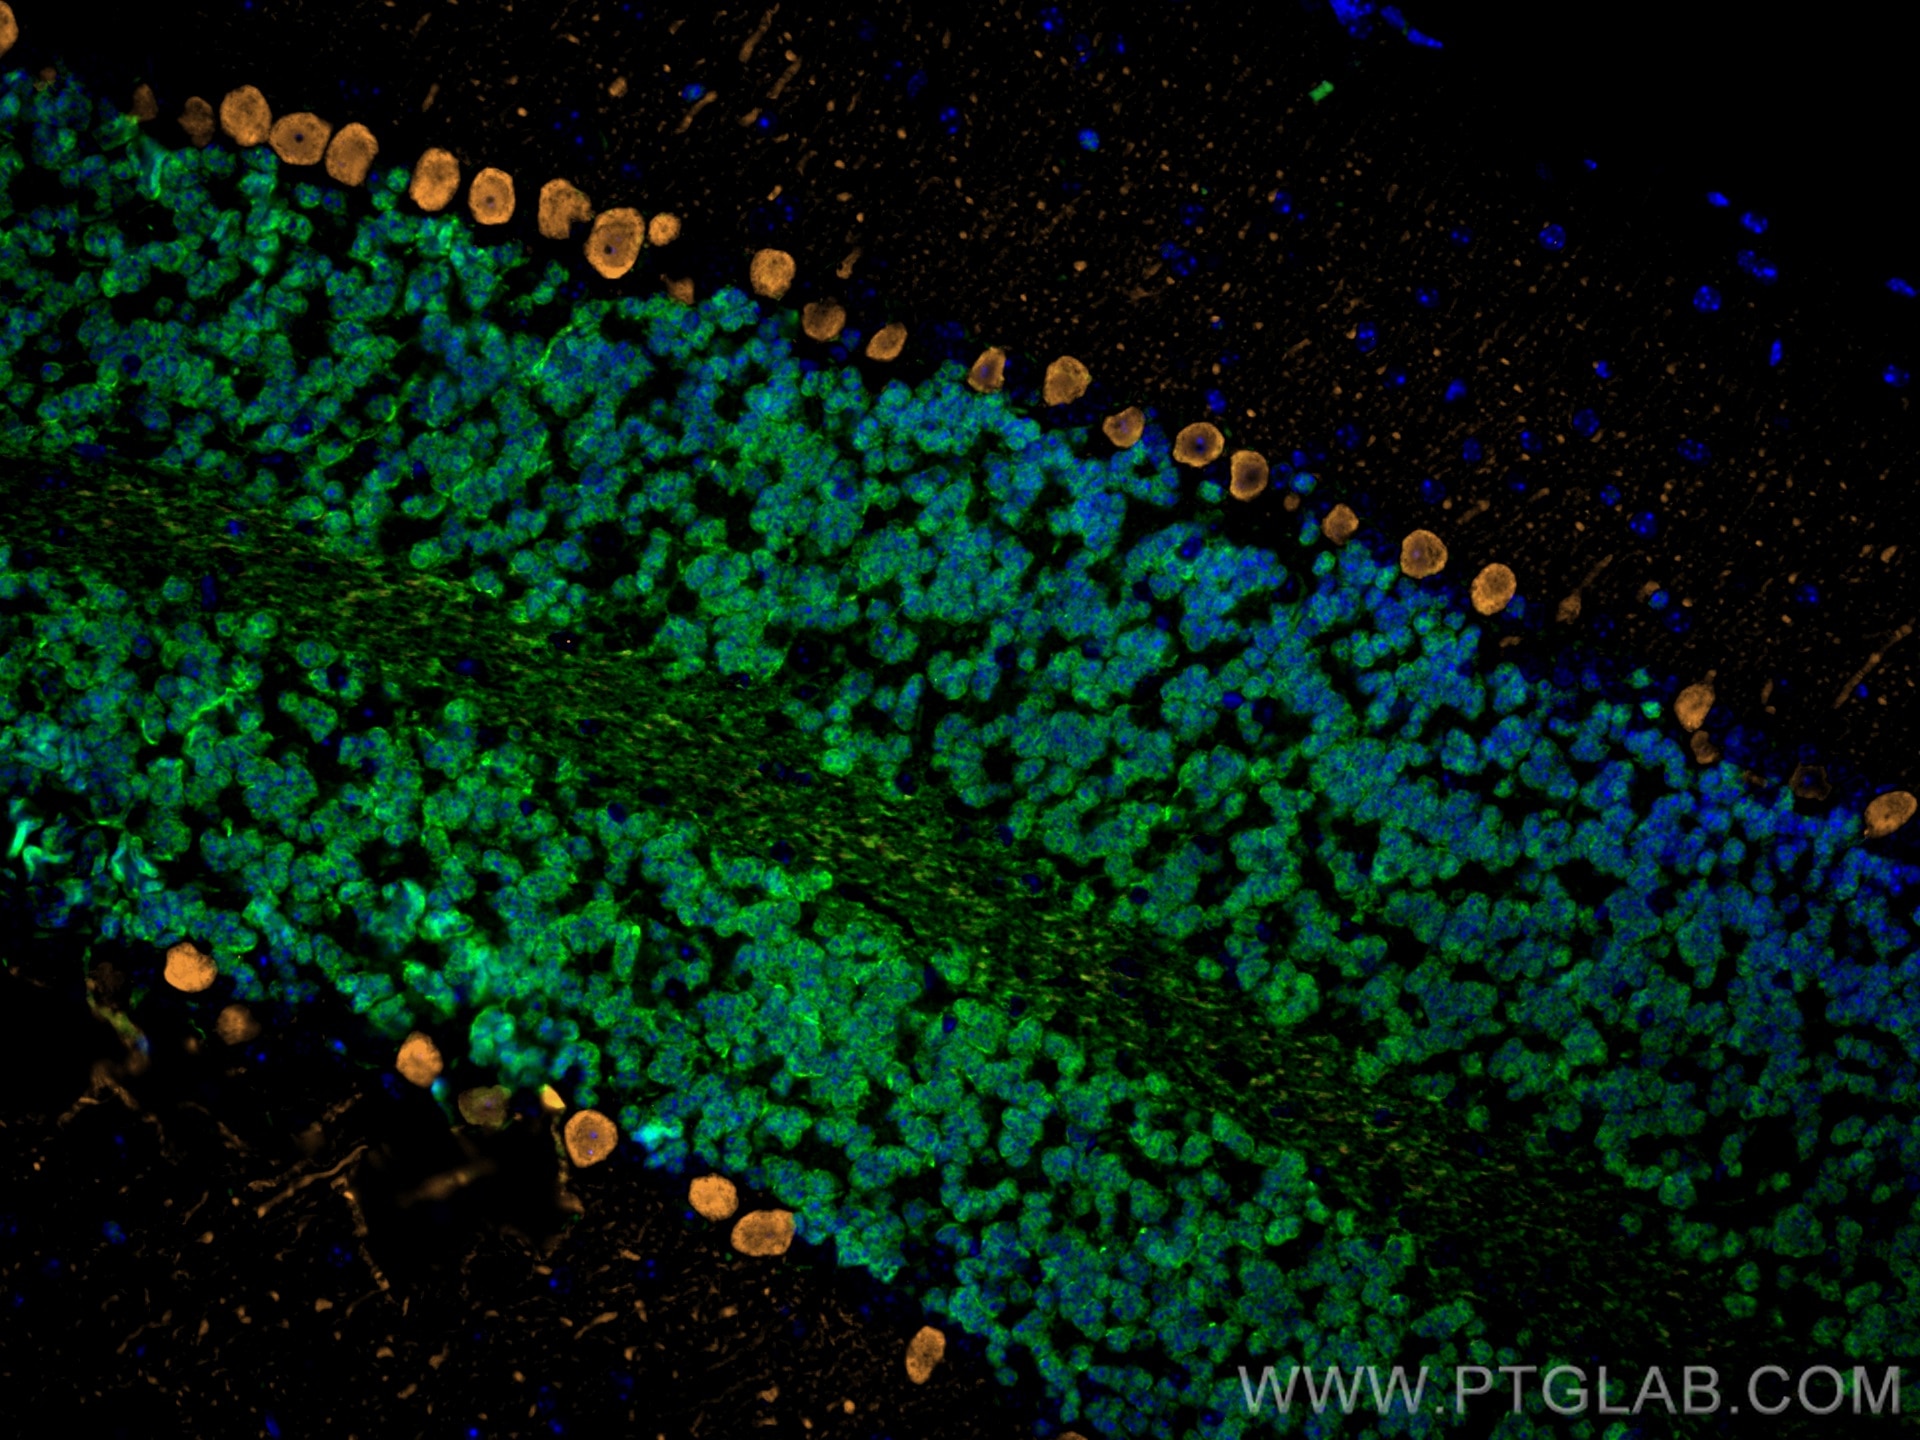 Immunofluorescence of mouse cerebellum: mouse cerebellum FFPE section was stained with Rabbit anti-NeuN polyclonal antibody (26975-1-AP, 1:200, green) and mouse anti-Calbindin-D28k monoclonal antibody (66394-1-Ig, 1:200, orange). Multi-rAb CoraLite® Plus 488 conjugated Recombinant Goat anti-rabbit secondary antibody (RGAR002, 1:500) and Multi-rAb CoraLite® Plus 555 conjugated Recombinant Goat anti-mouse secondary antibody were used for detection (RGAM003, 1:500) . 